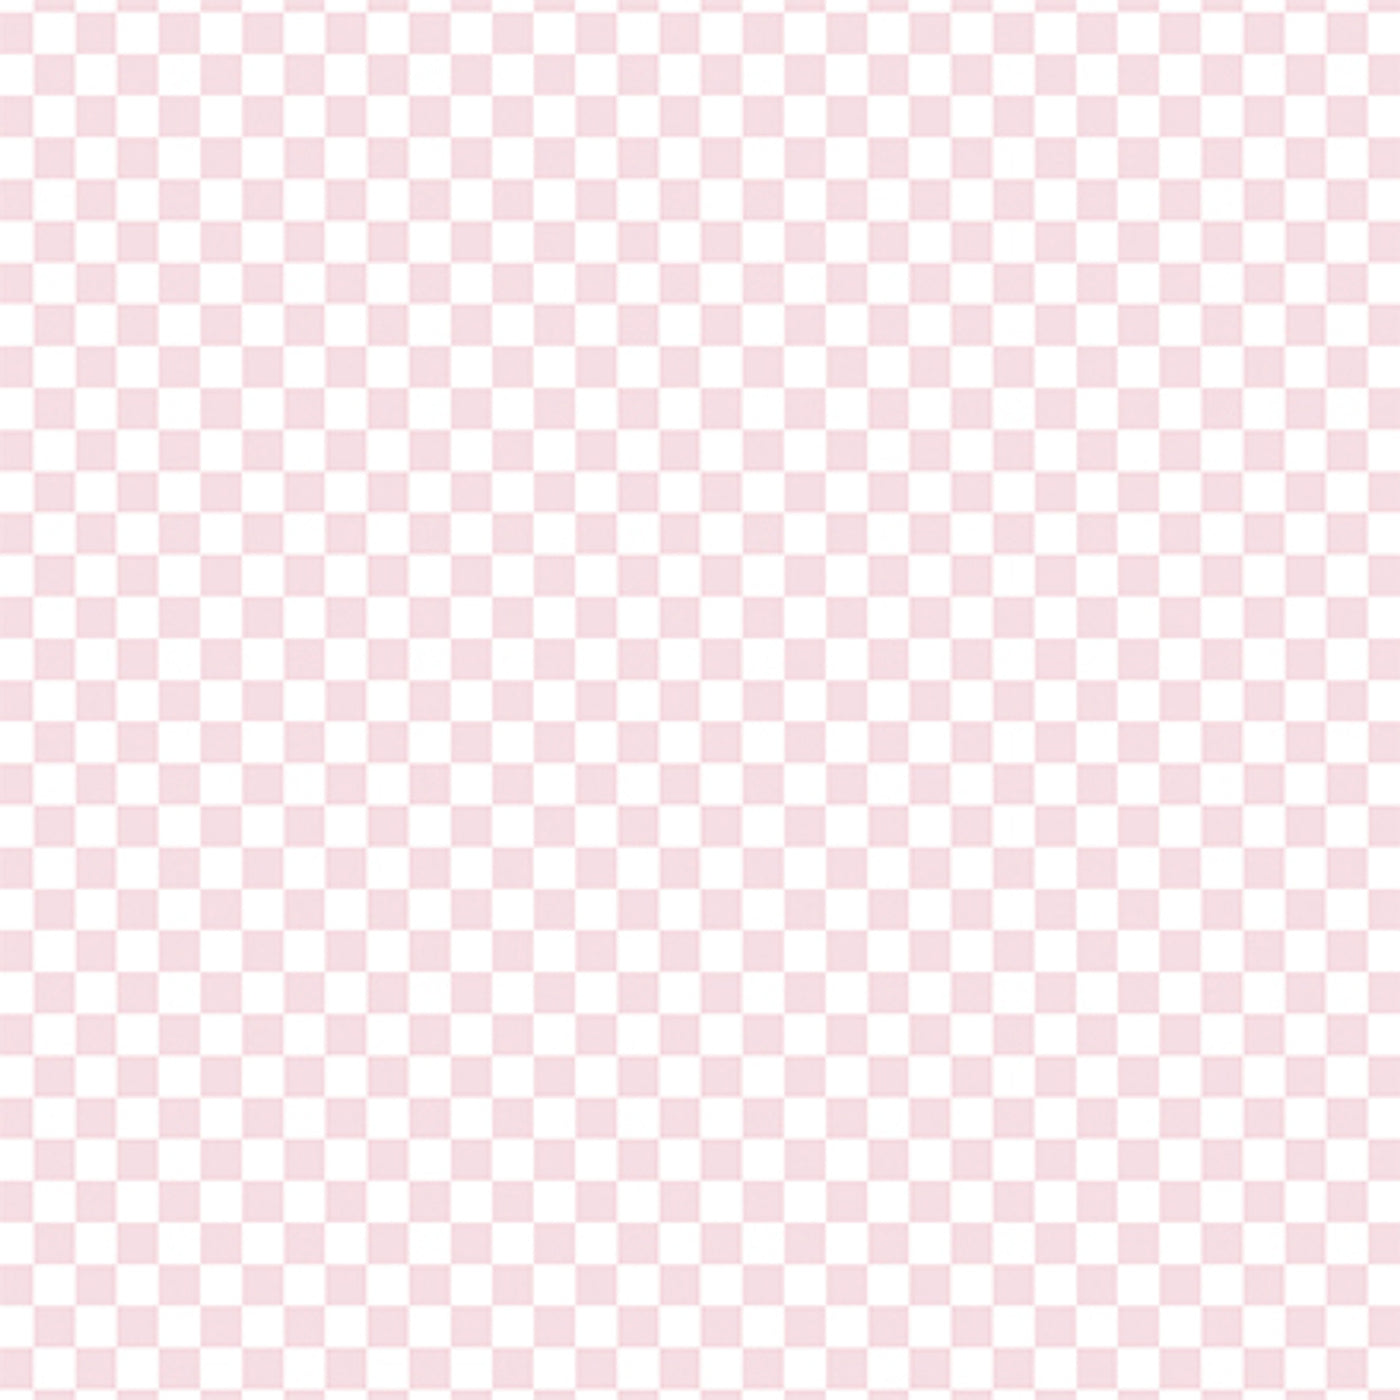 CHECKERBOARD POWDER PINK - 12x12 Patterned Cardstock - Echo Park